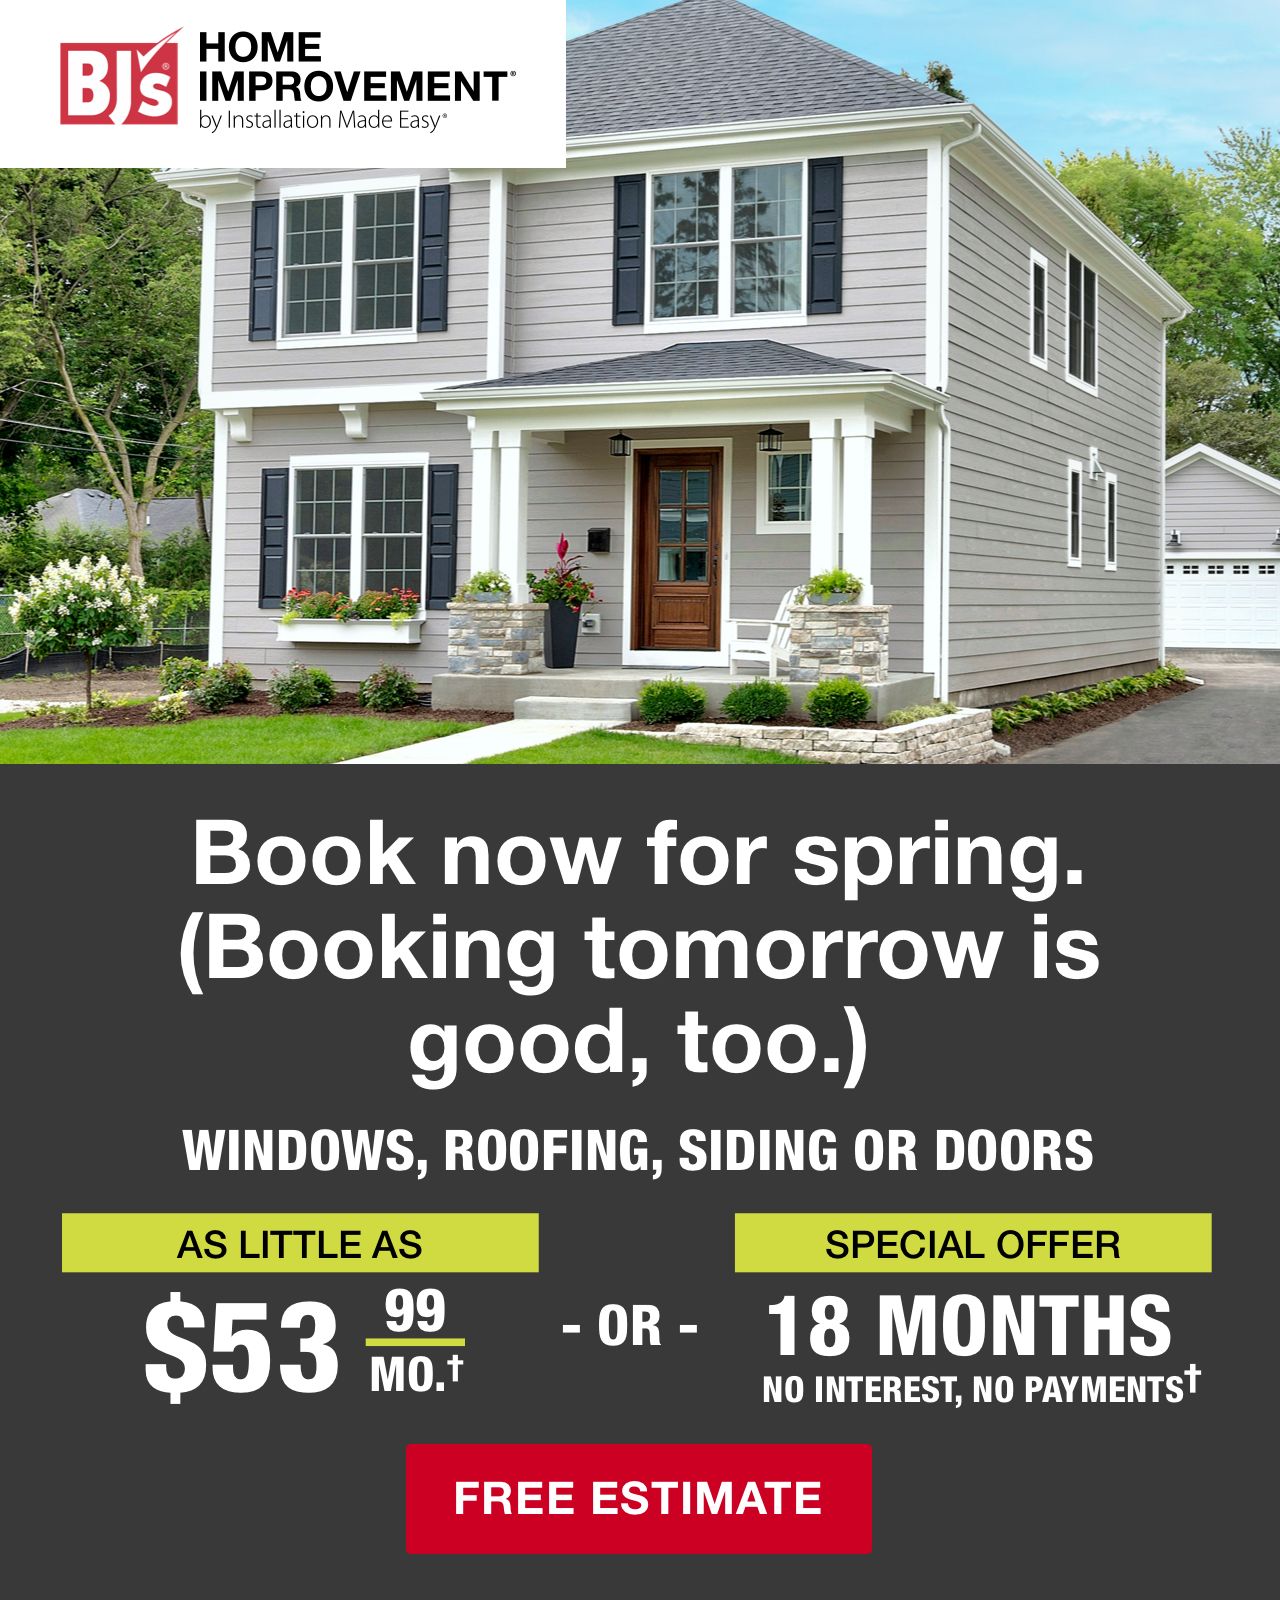 BJ's Home Improvement. Book now for spring (Booking tomorrow is good, too). Window, roofing, siding or doors. As little as $53.99/mo† or Special Offer 18 motnsh no interest, no payments†. Click here for free estimate